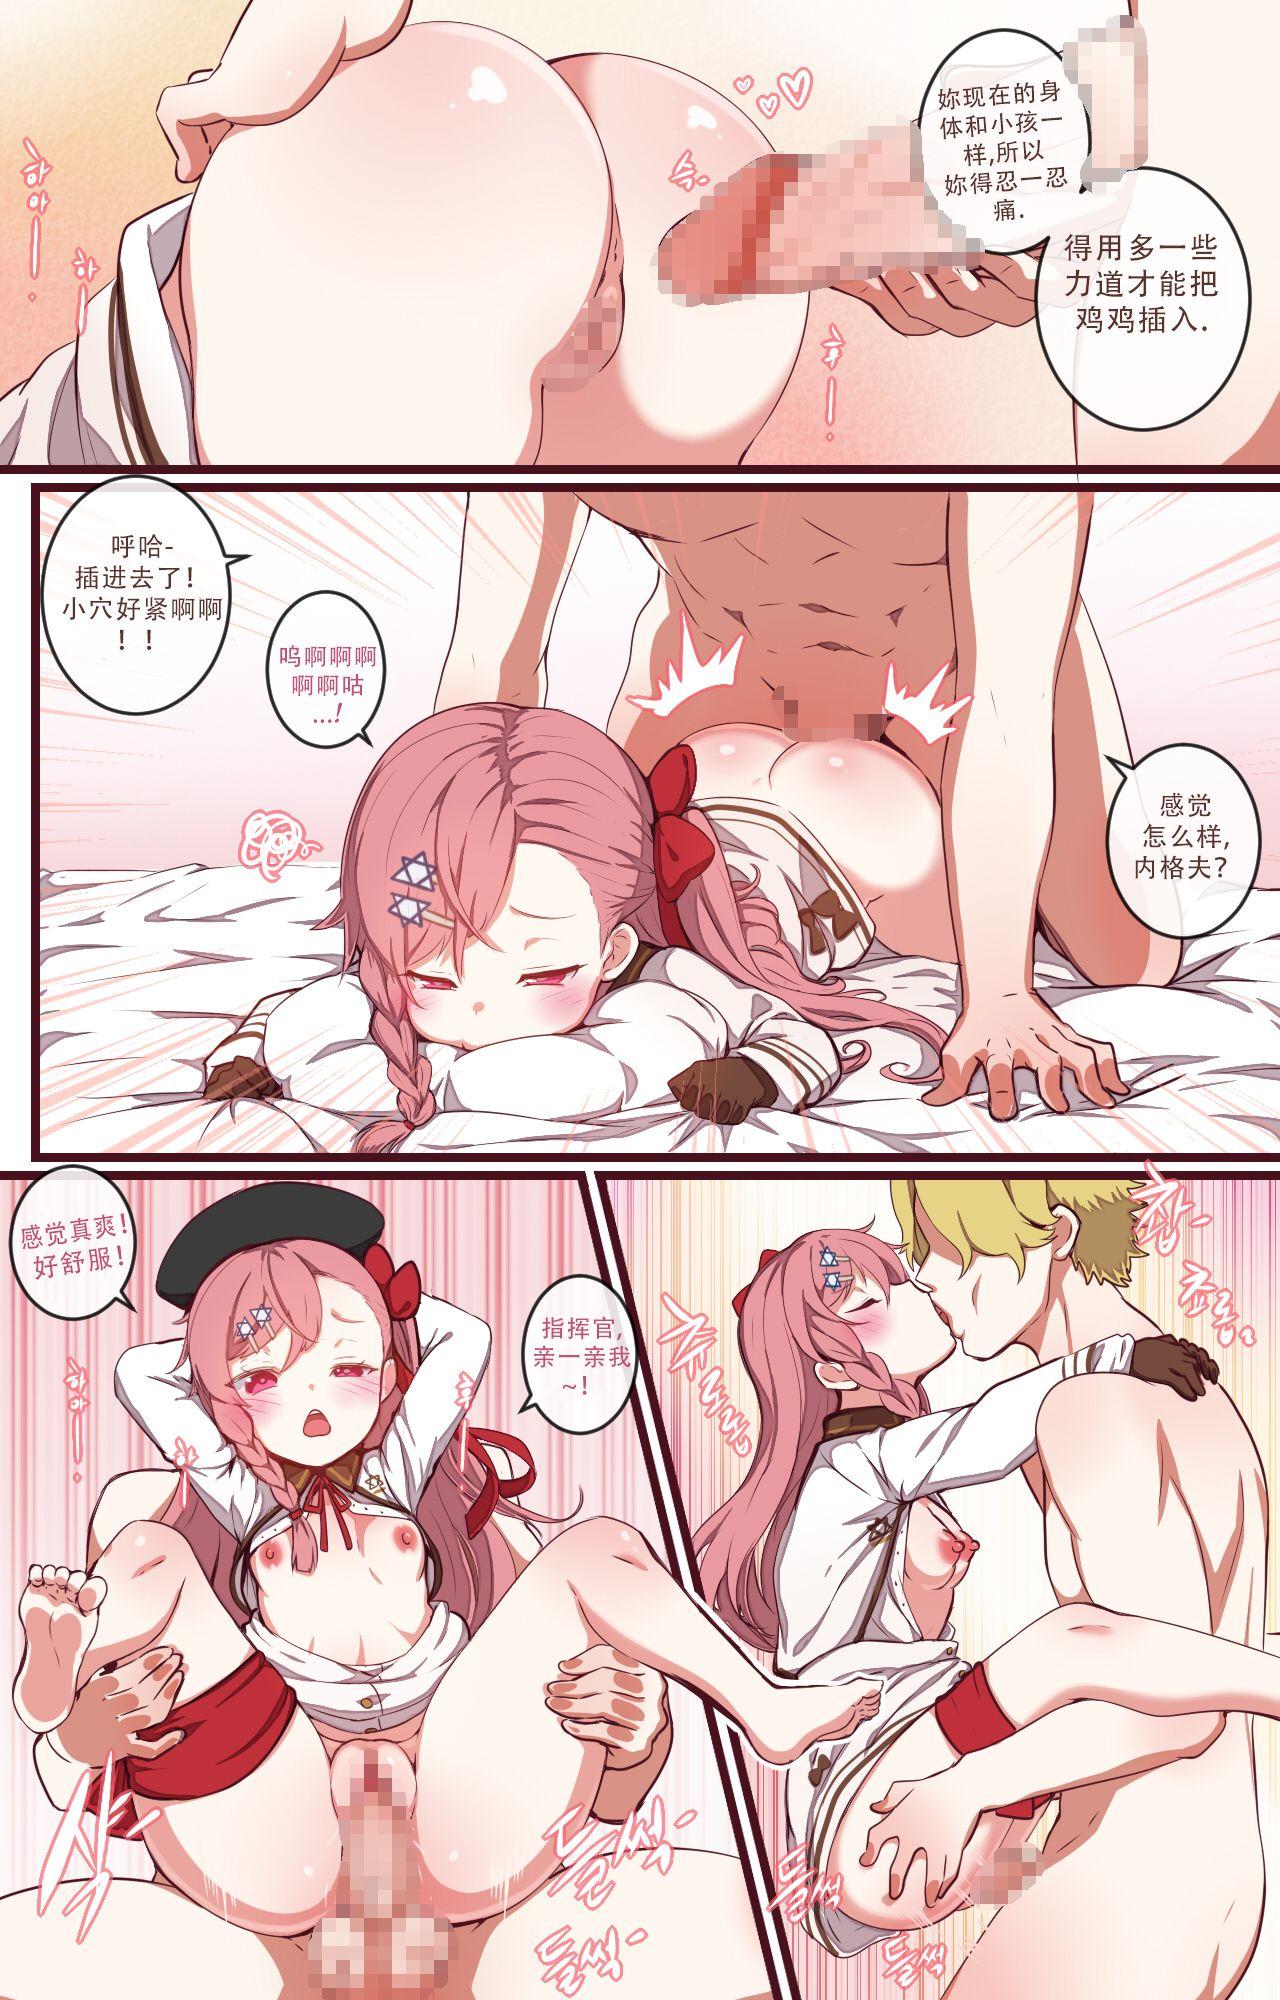 Shoes [yun-uyeon (ooyun)] How to use dolls 03 (Girls Frontline) [Chinese]【火狸翻译】 - Girls frontline Massage Sex - Page 12